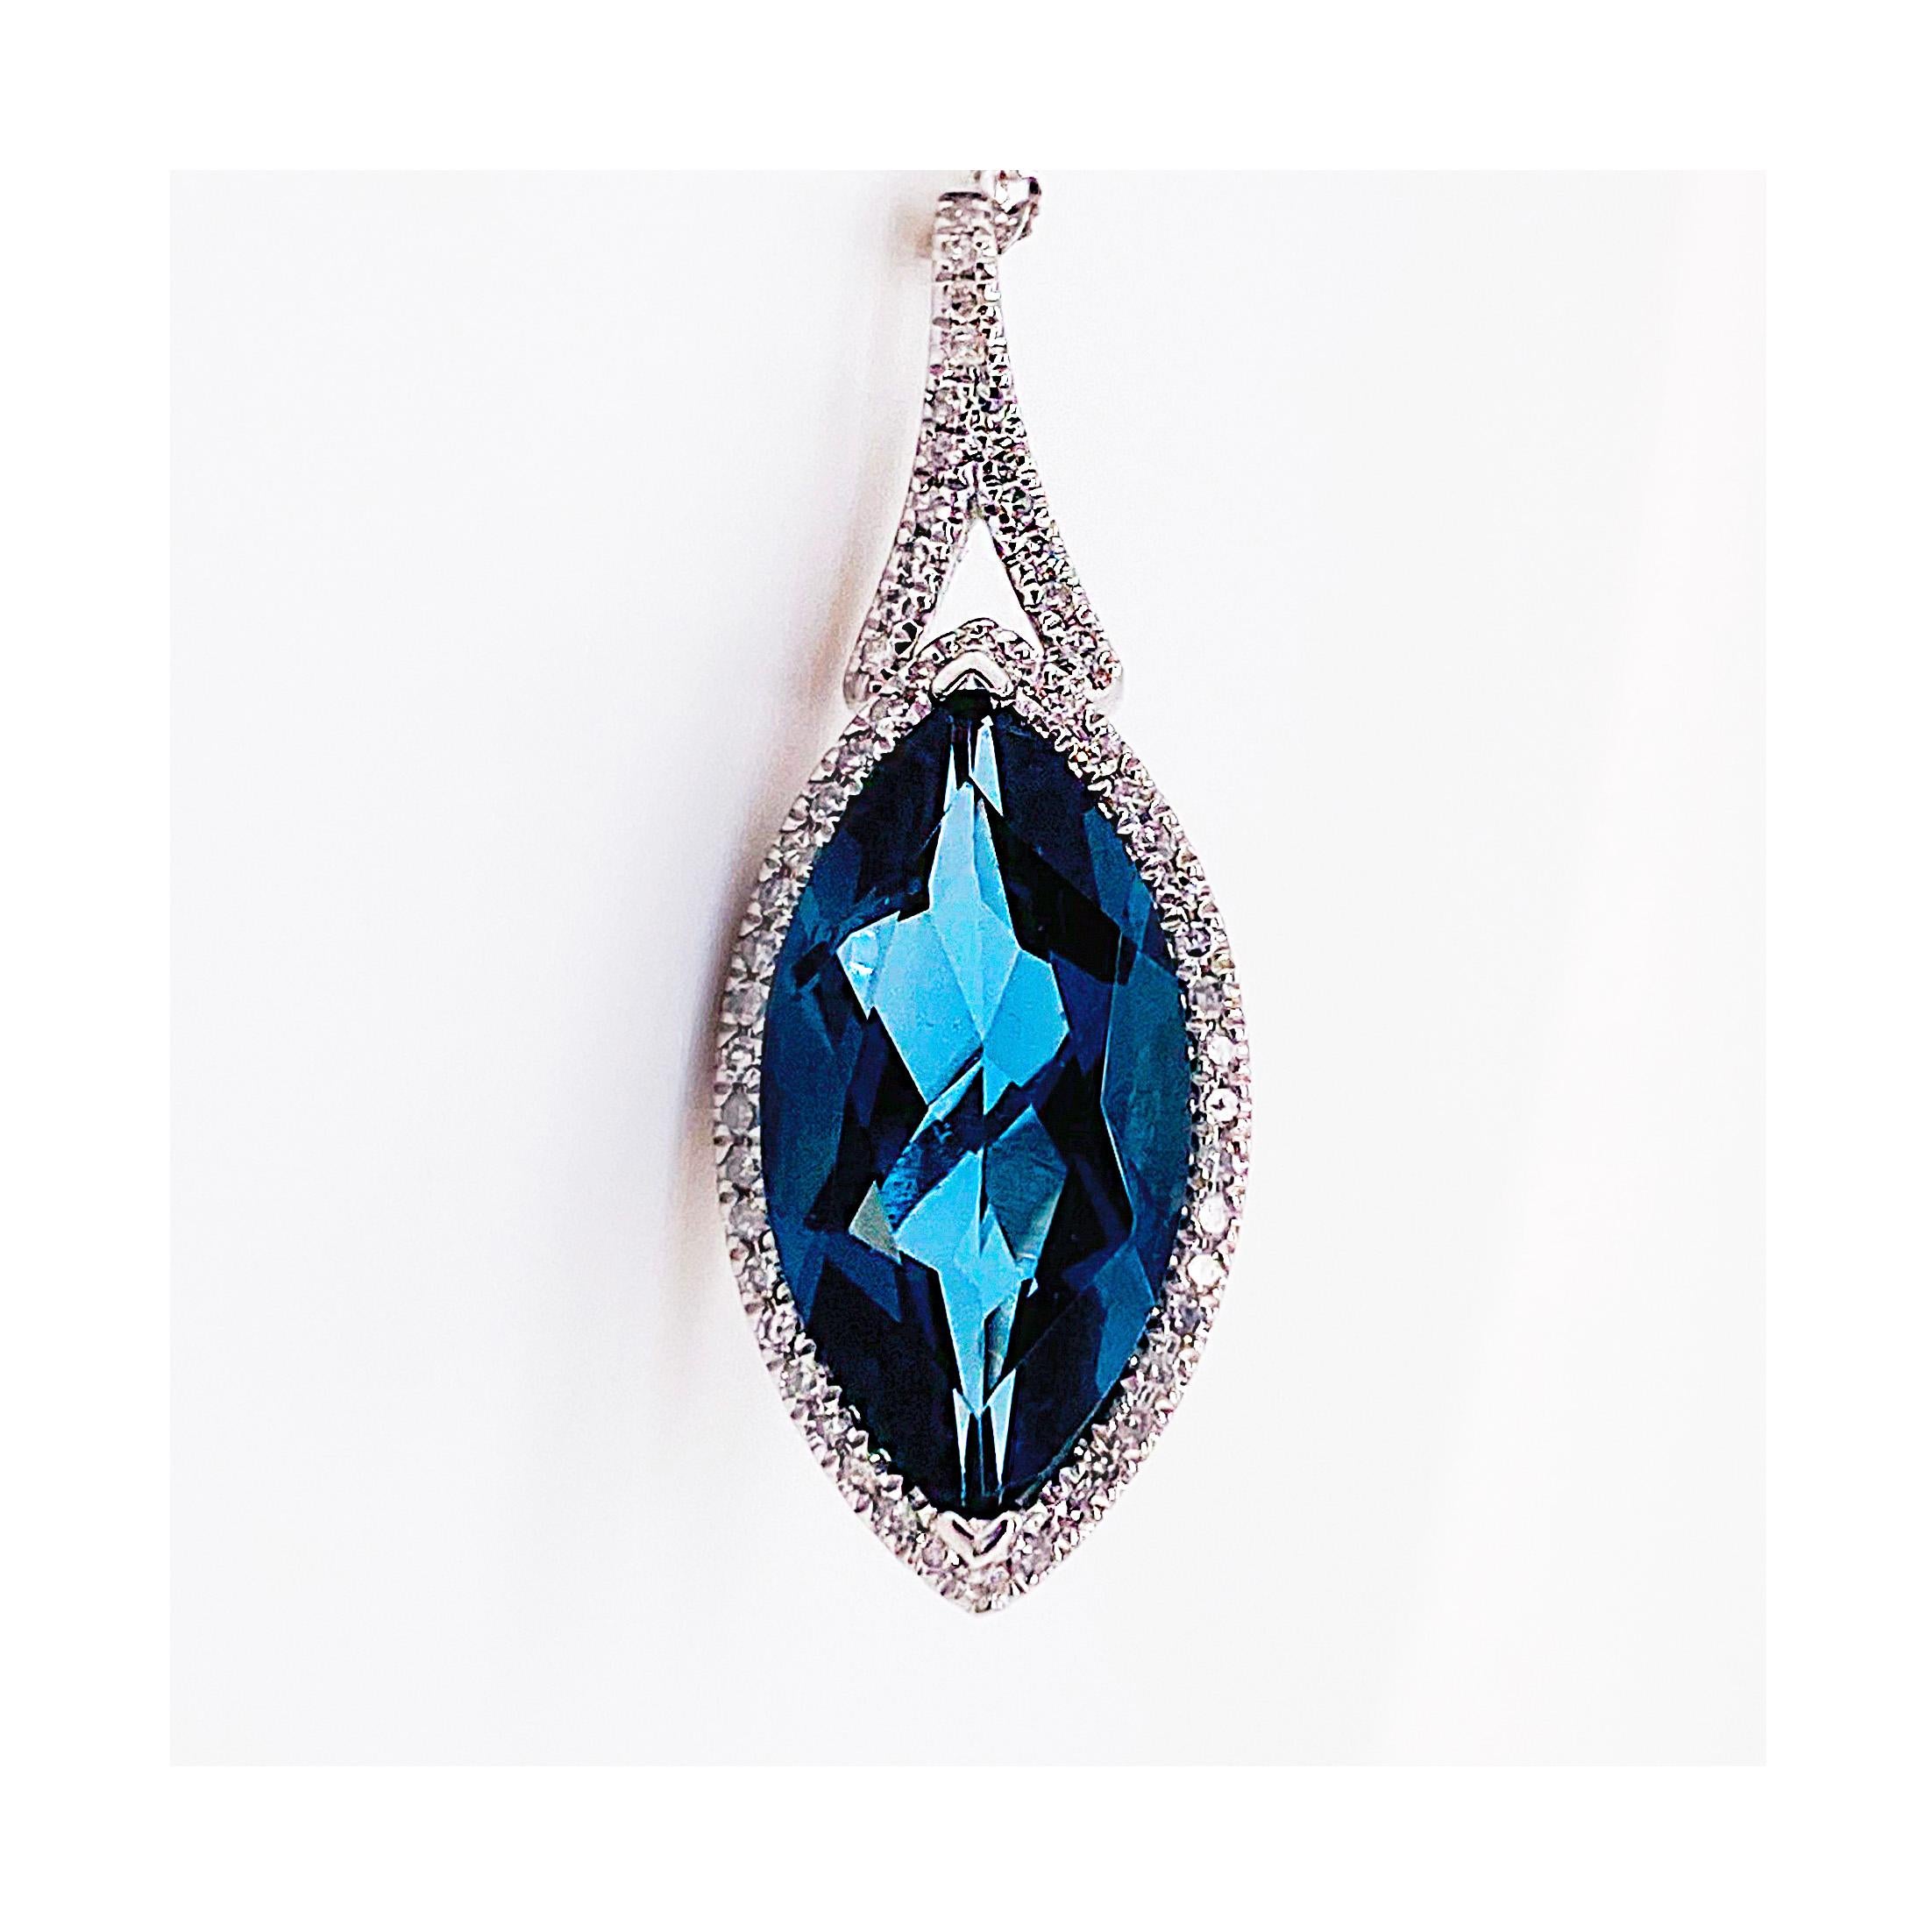 The 4.19 carat Royal London Blue Topaz is in 14K White Gold is magnificent! It has a string of diamonds going all the way around it and diamonds on the bail!  The pendant matches really well with a pair of dangle earrings in our shop